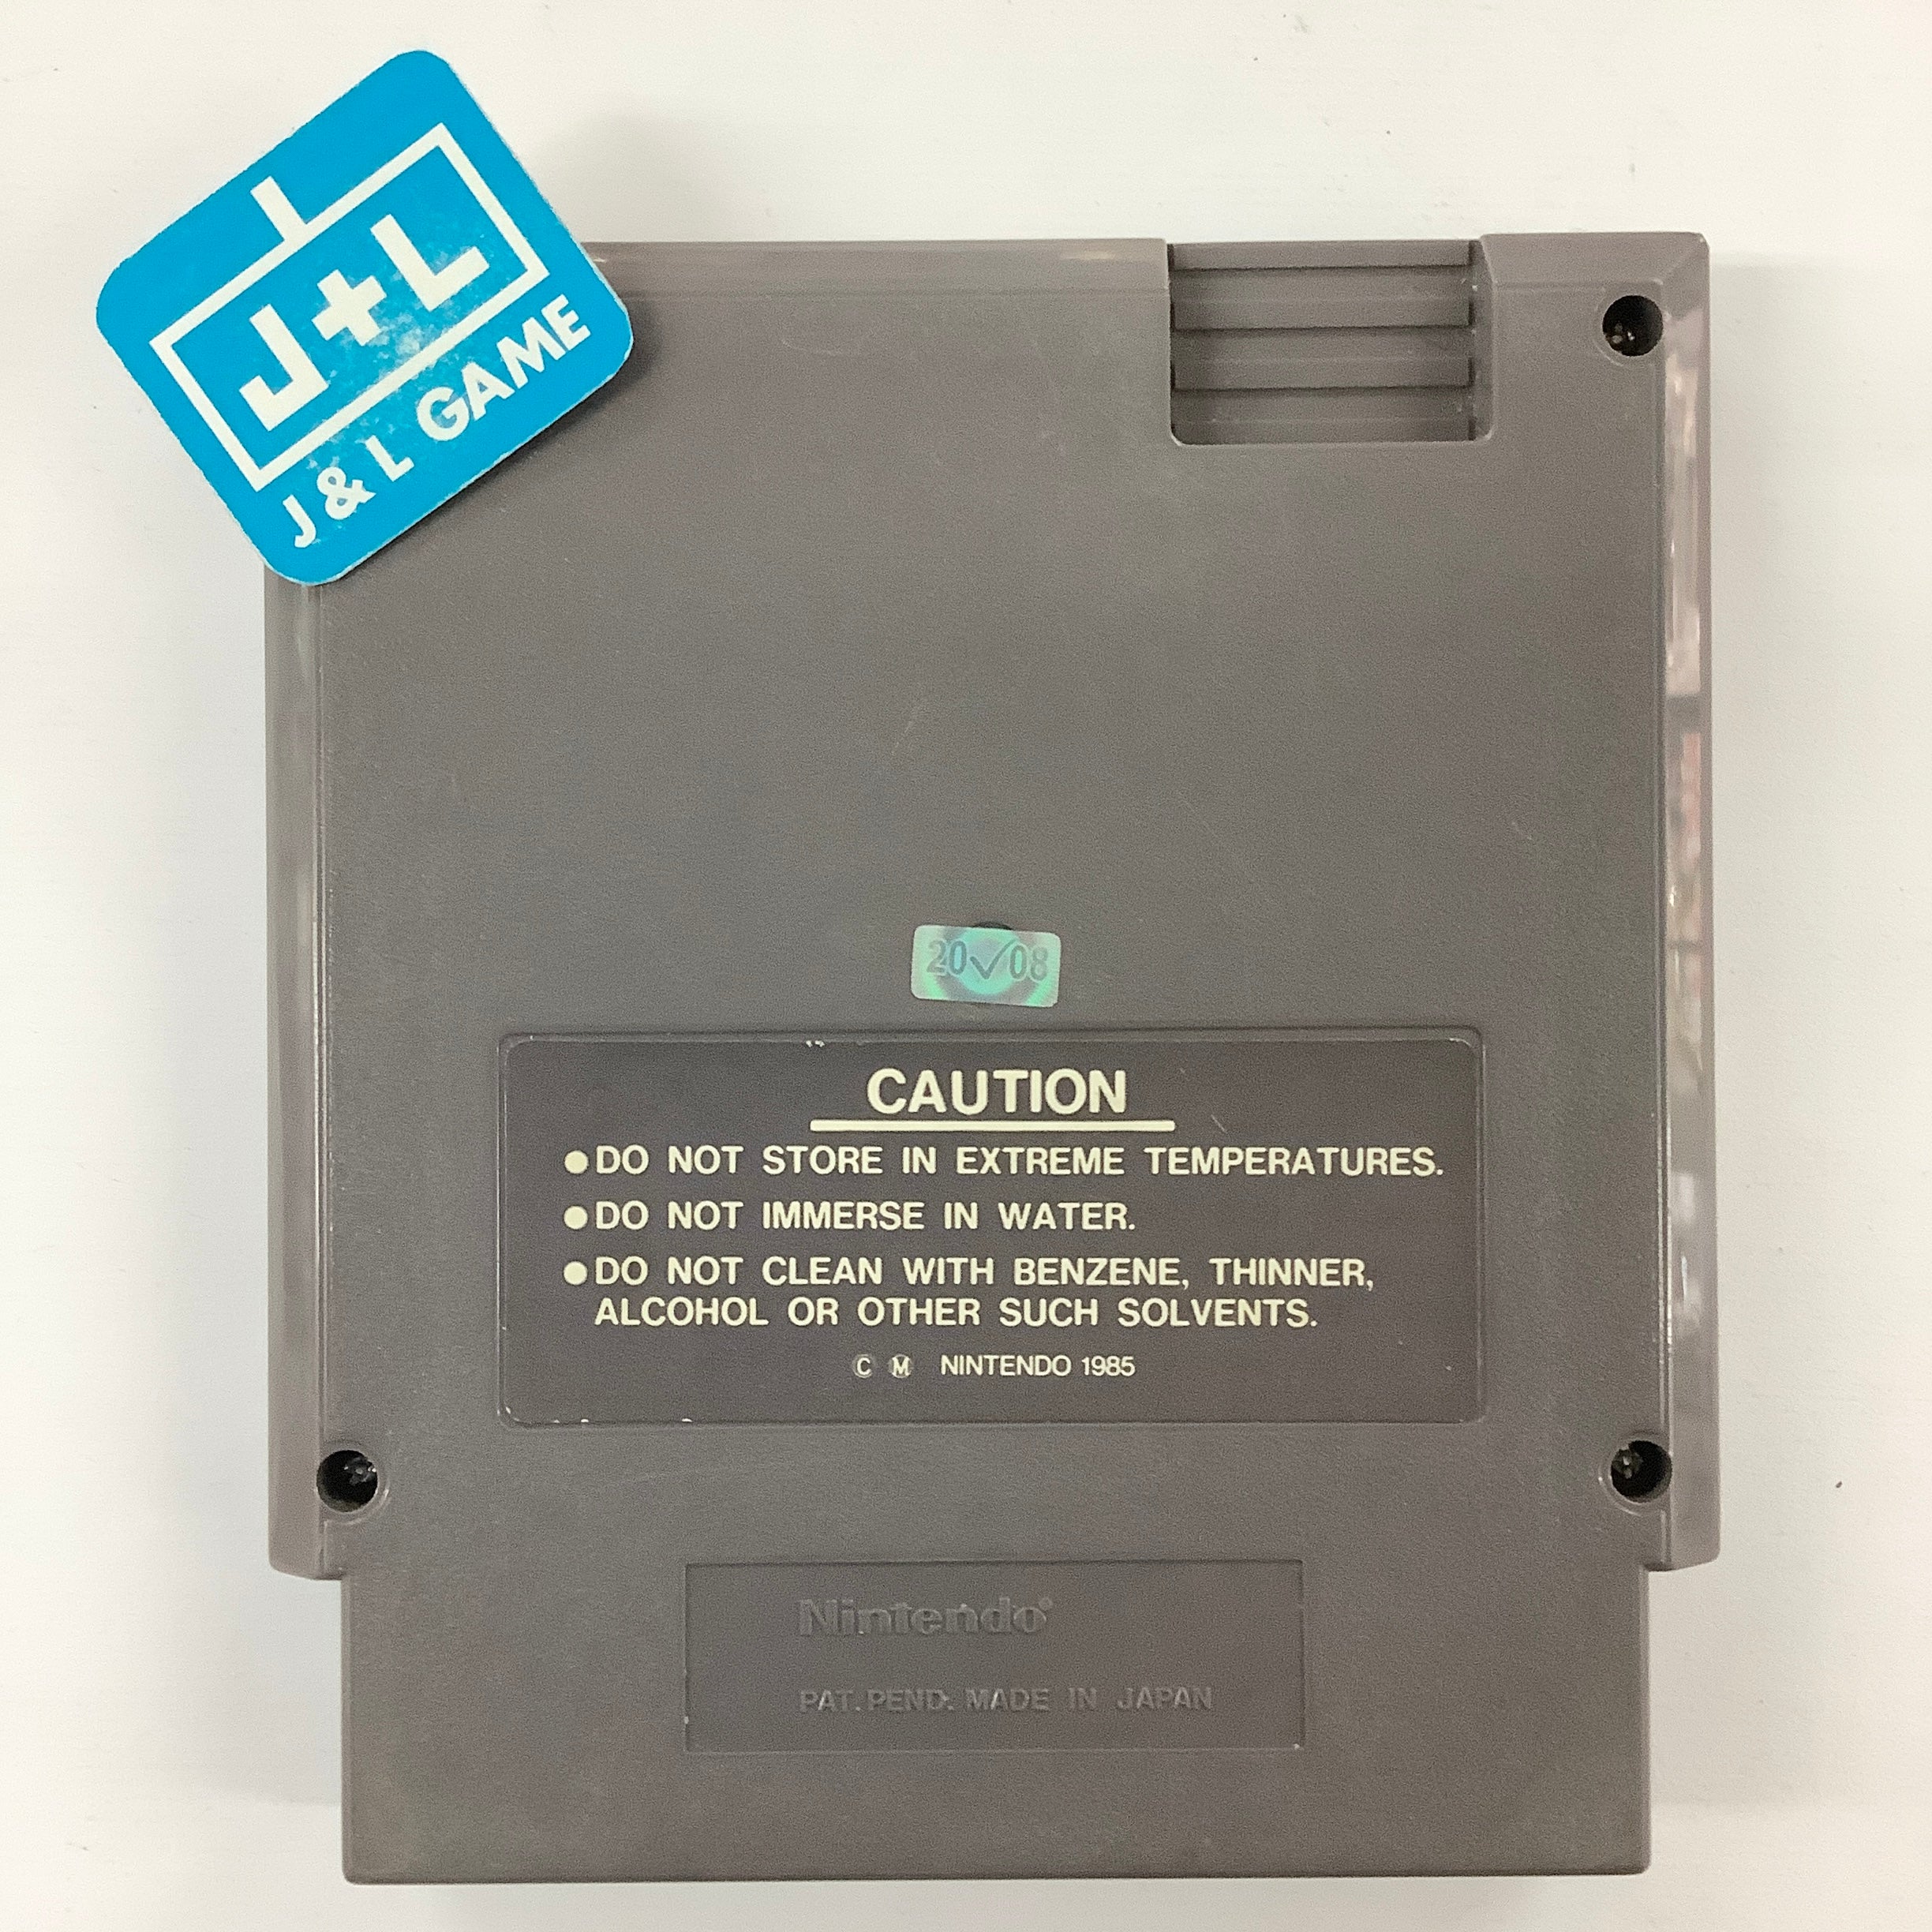 Tag Team Wrestling - (NES) Nintendo Entertainment System [Pre-Owned] Video Games Data East   